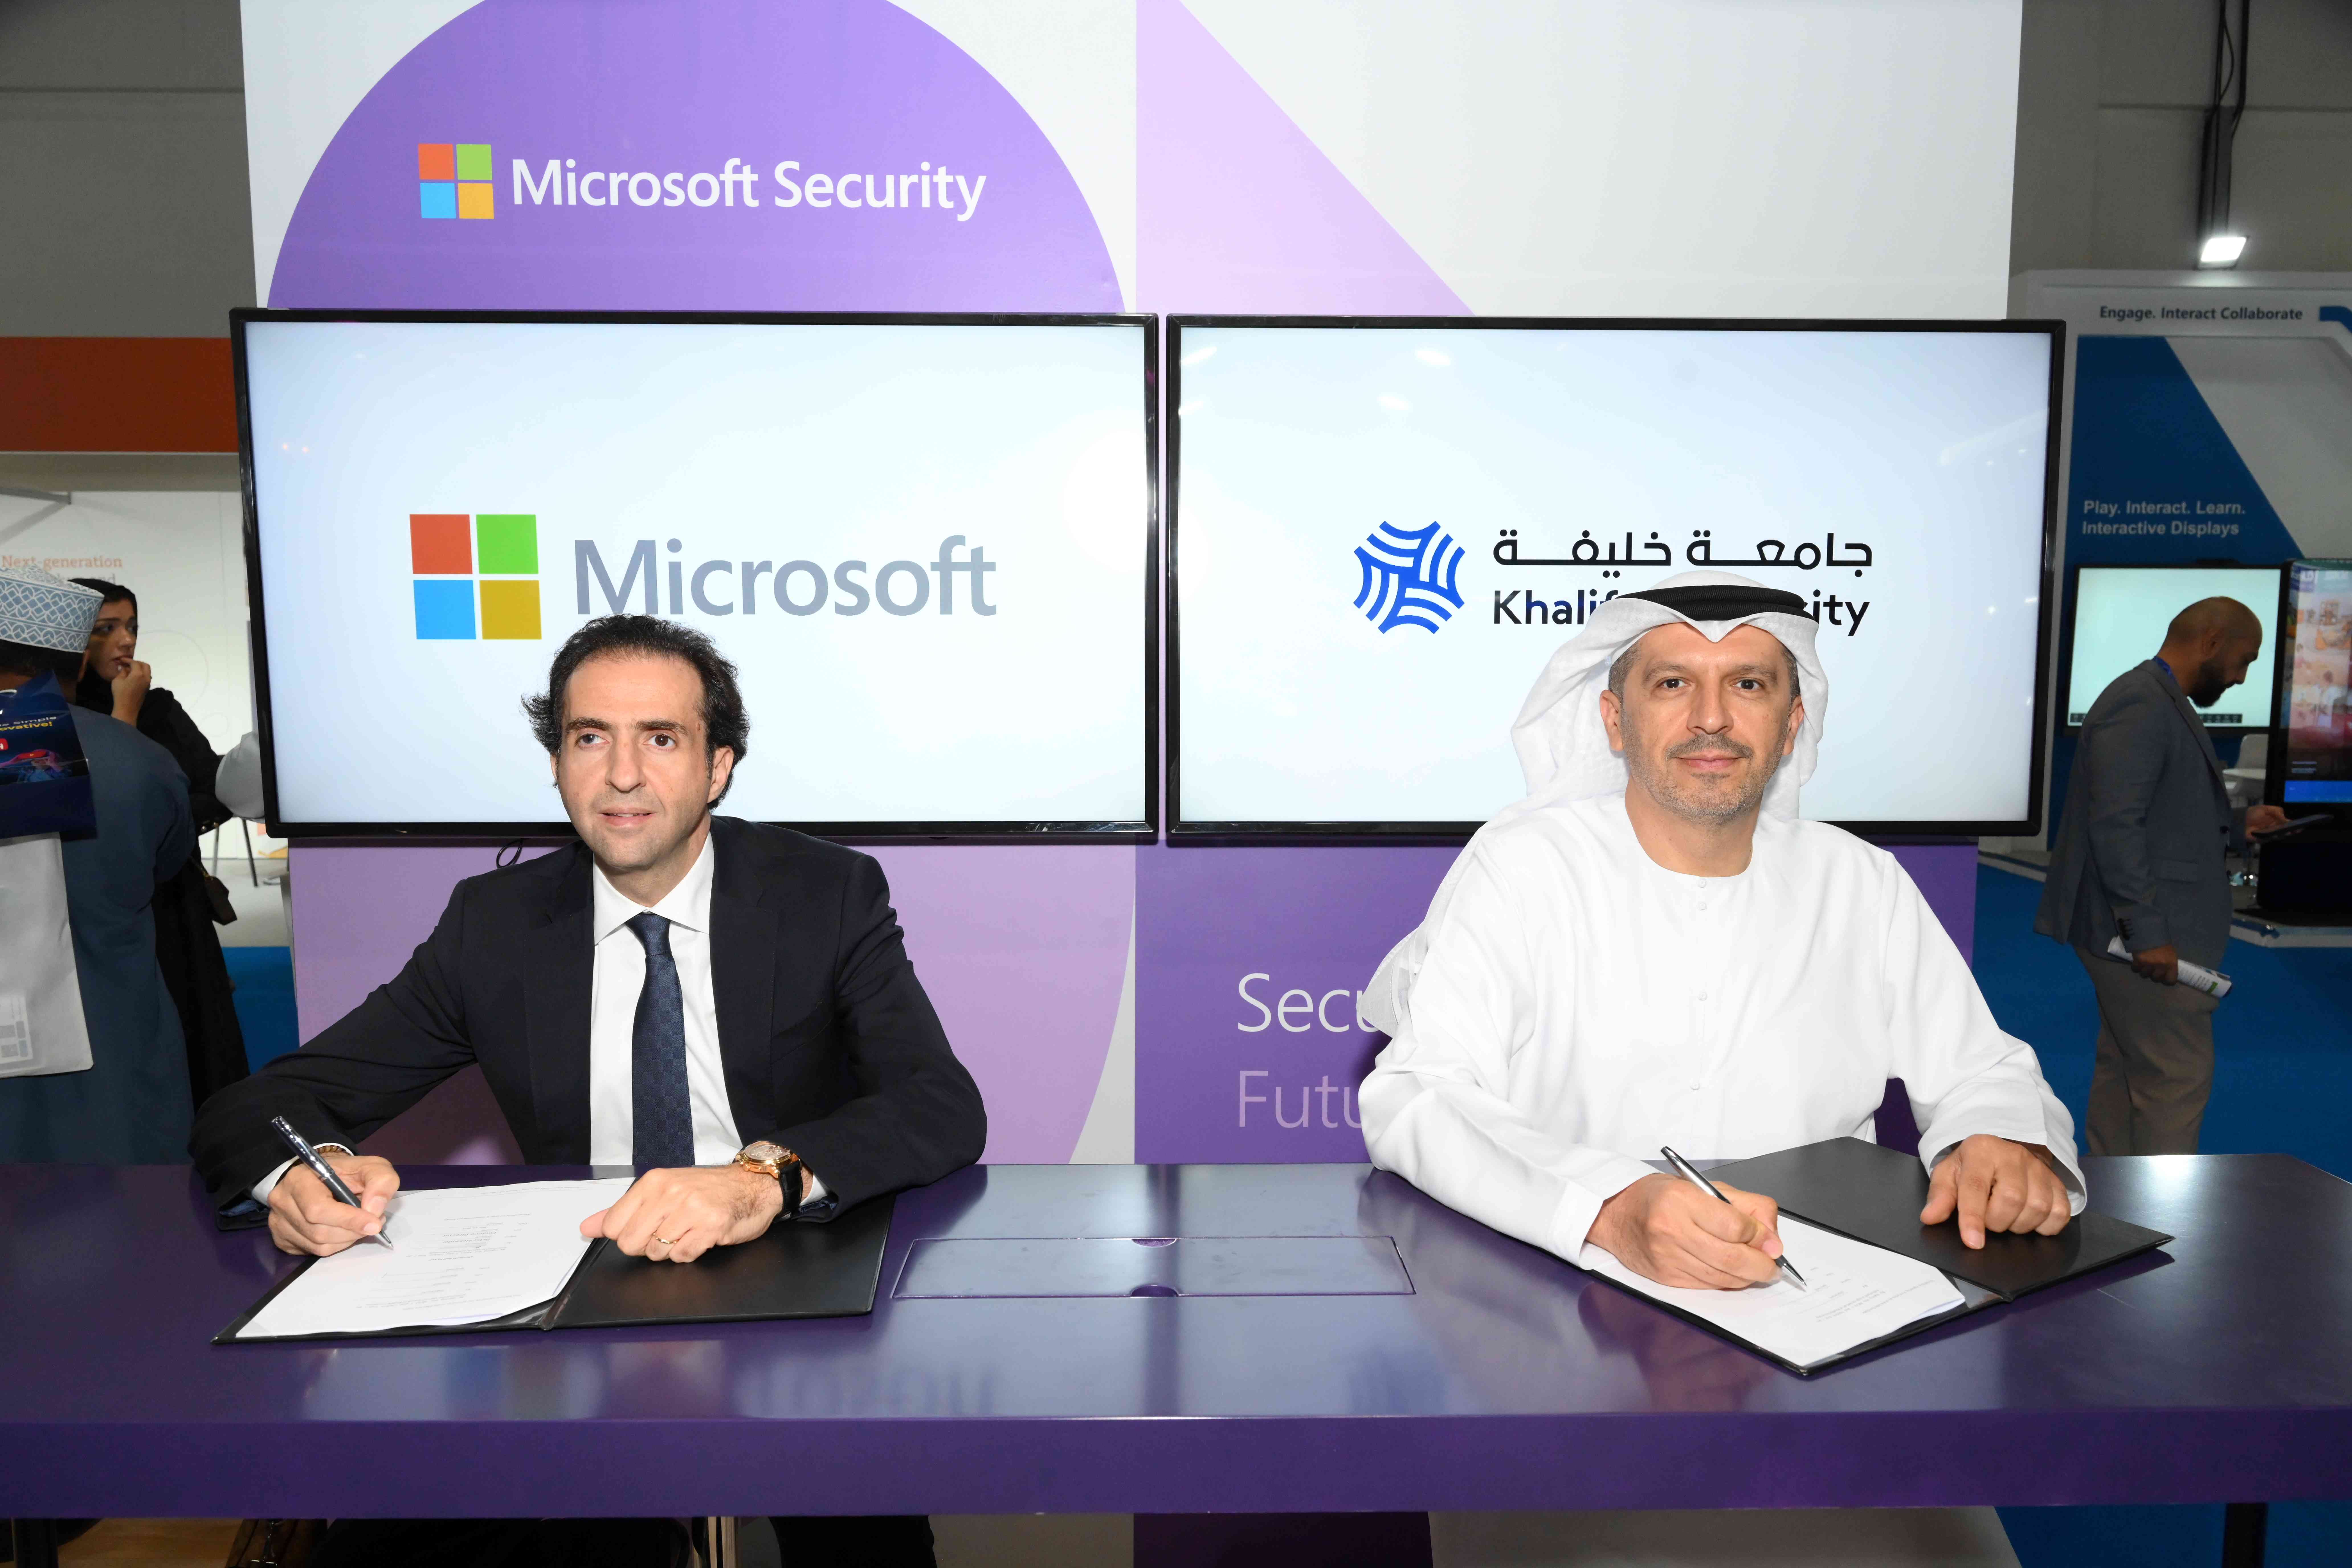 Khalifa University to Run ‘Metaversity Hackathon’ Competition Supported by Microsoft